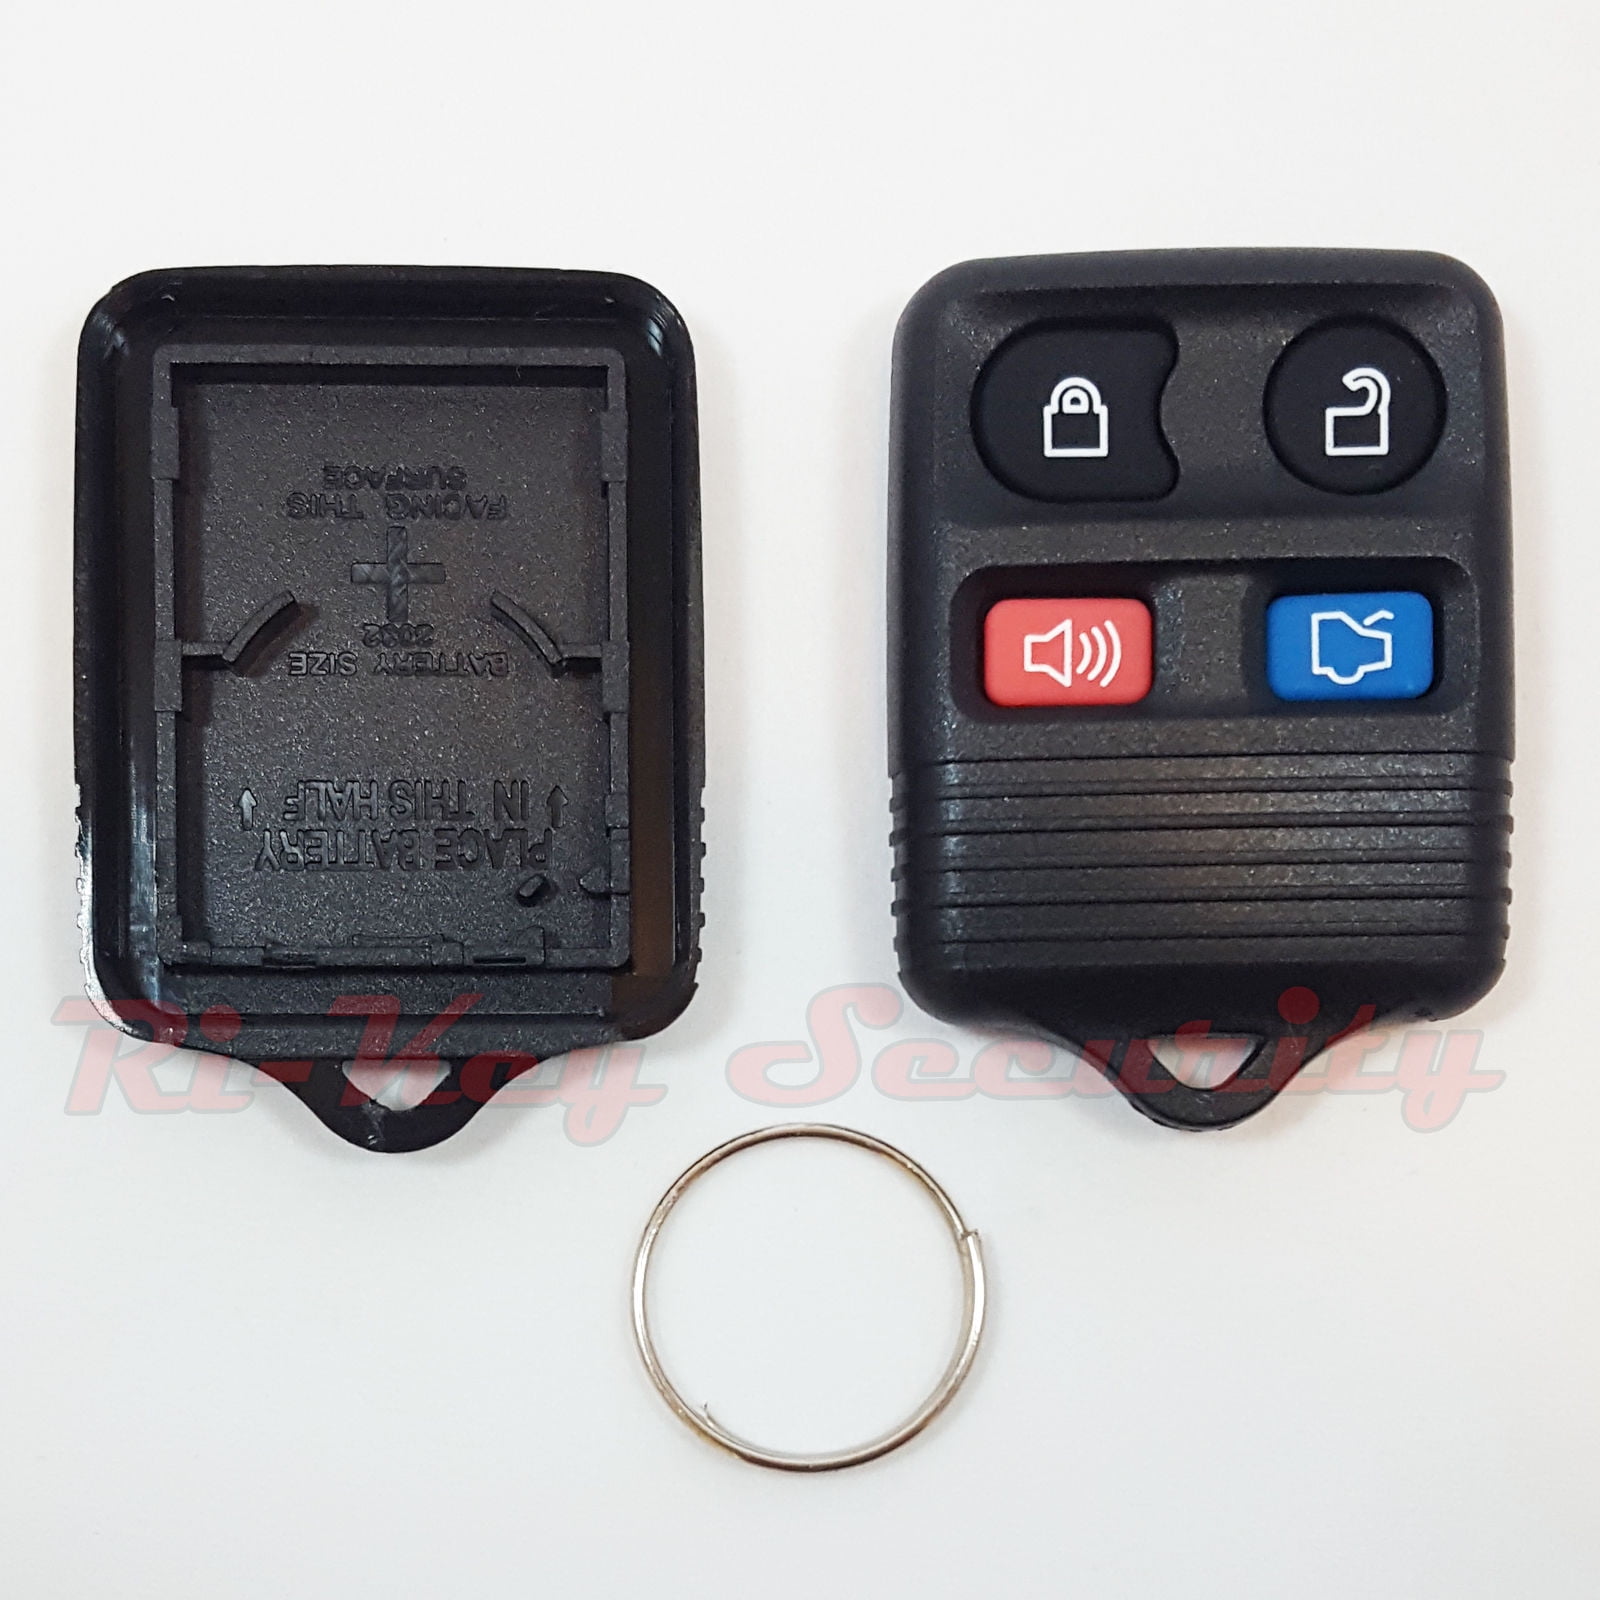 NEW Keyless Entry Key Fob Remote For a 2008 Ford Escape 3Buttons DIY Programming